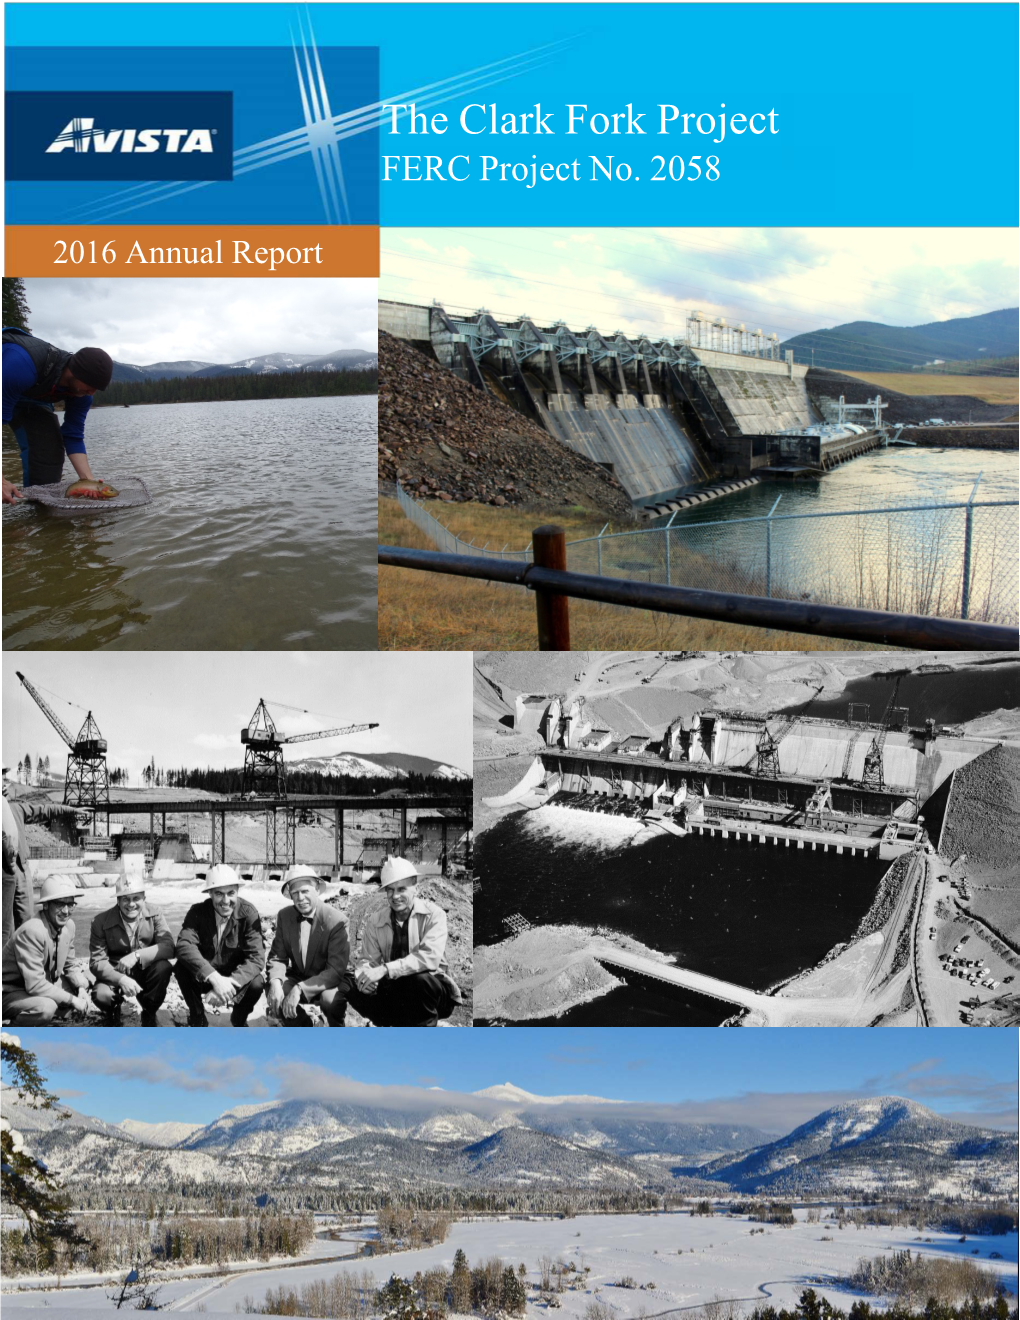 The Clark Fork Project